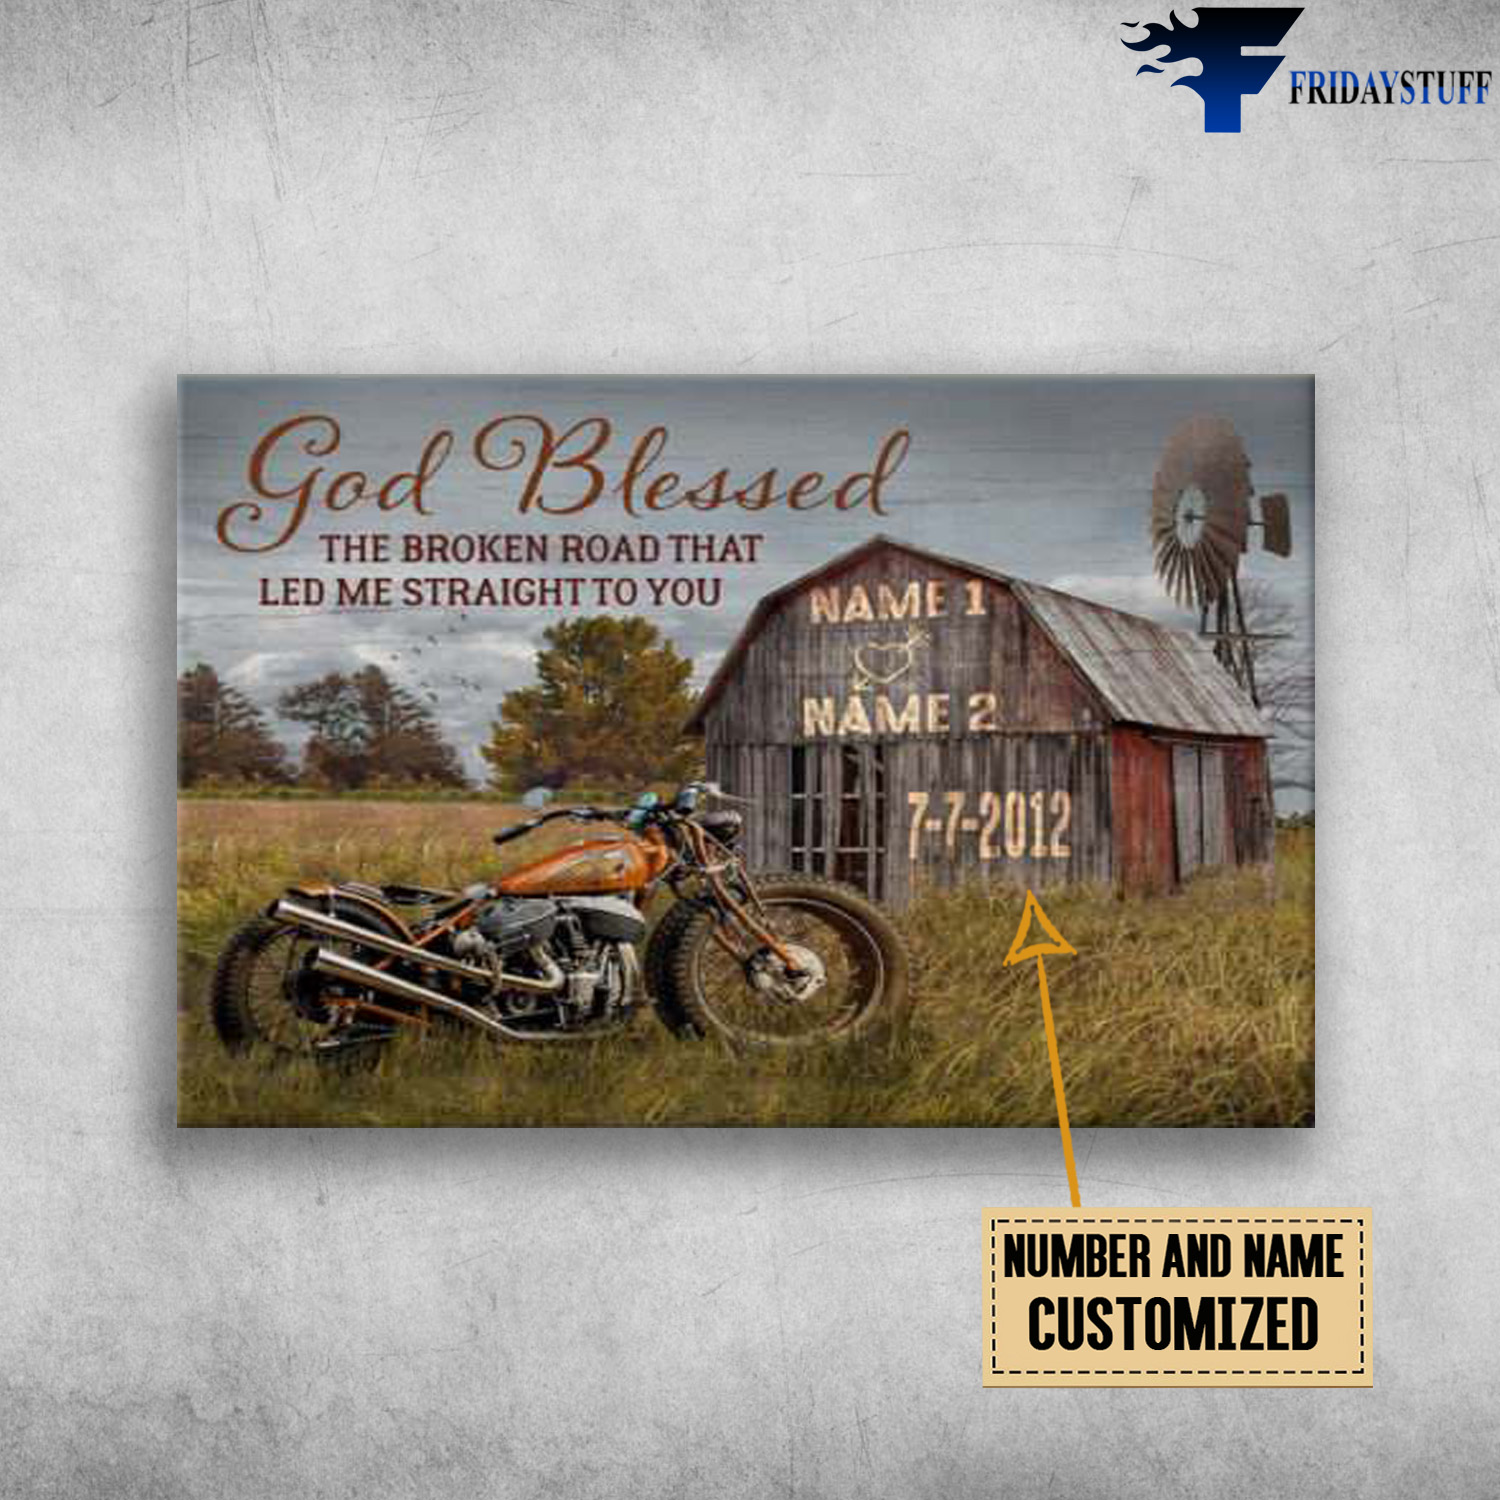 Motorcycle Farmhouse, God Blessed, The Broken Road That, Led Me Straight To You